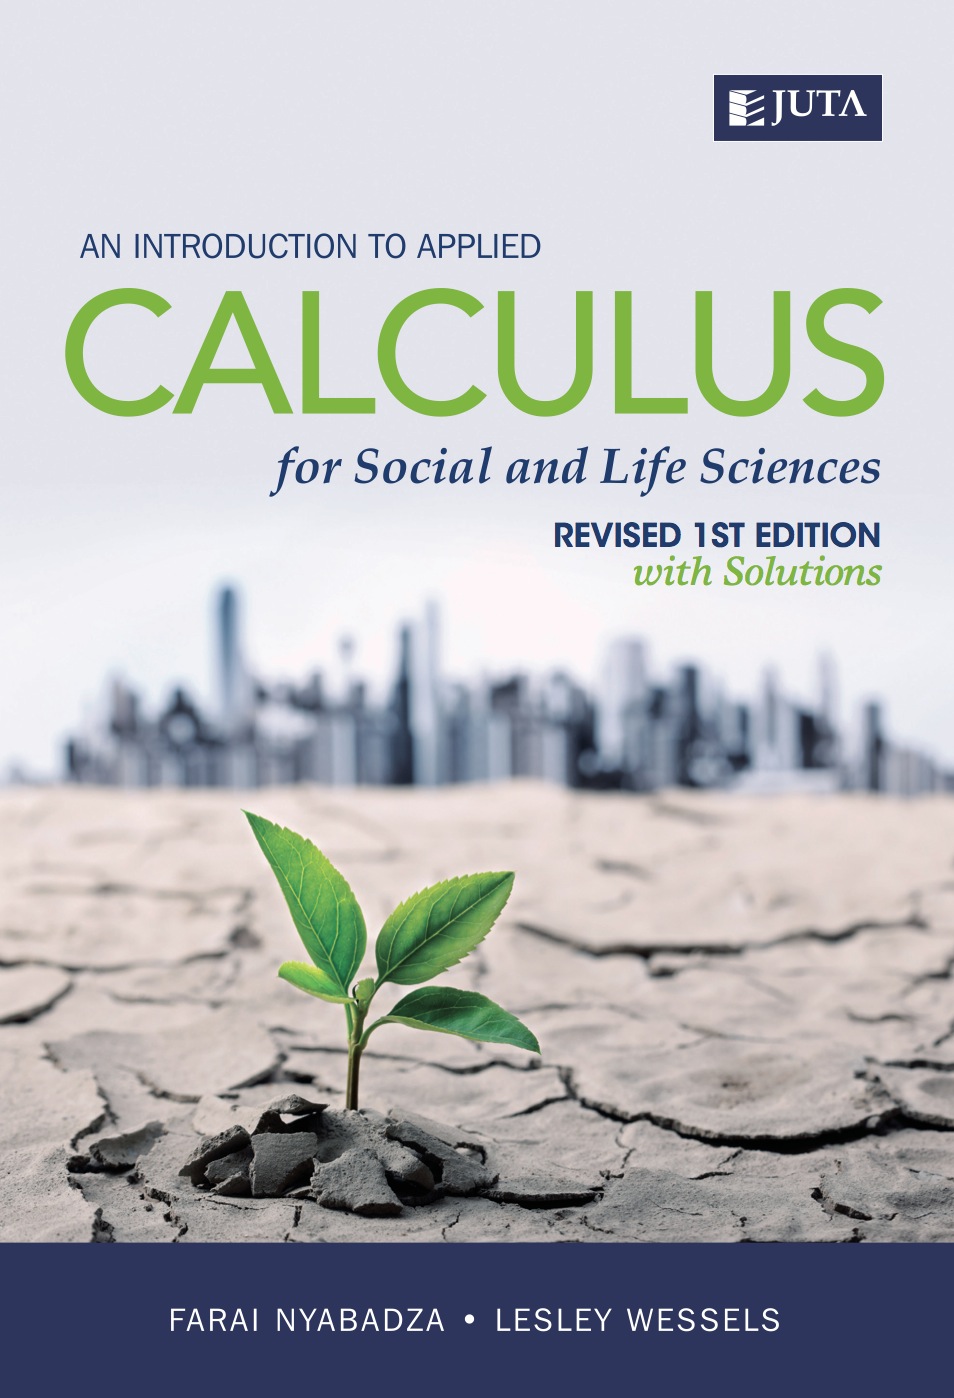 Introduction to Applied Calculus, An